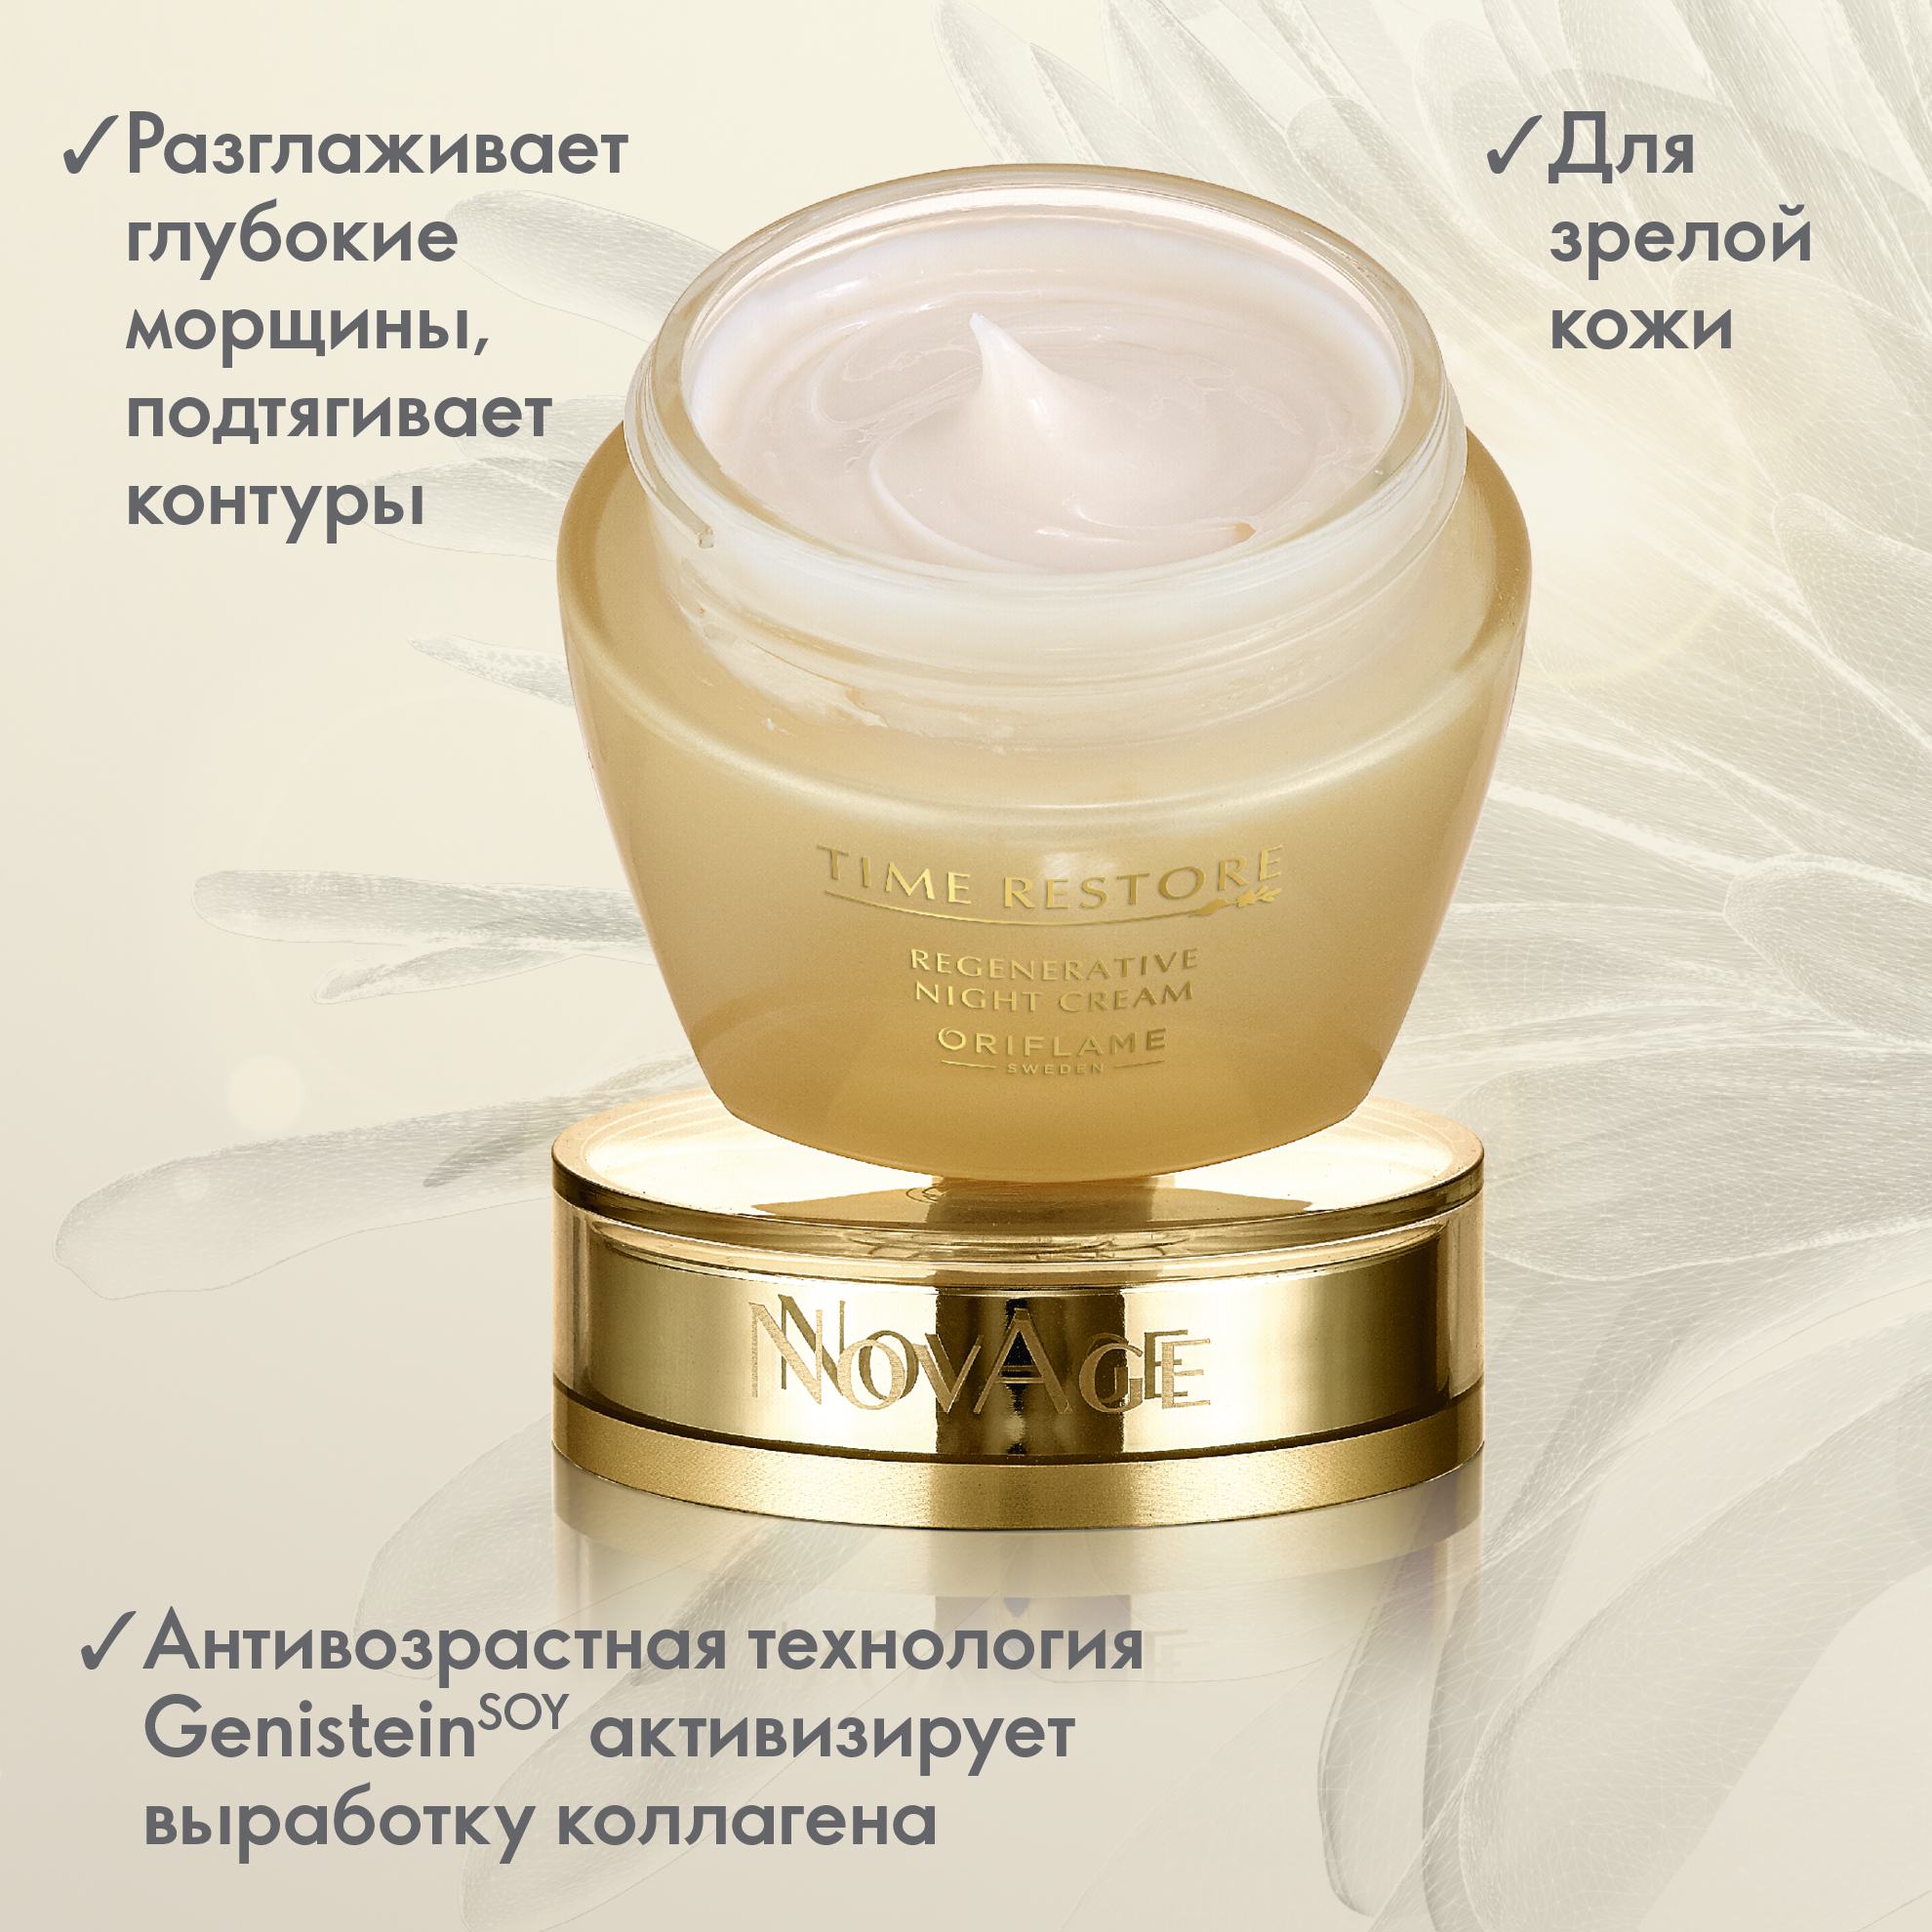 https://media-cdn.oriflame.com/productImage?externalMediaId=product-management-media%2fProducts%2f32628%2fRU%2f32628_4.png&id=14463707&version=1